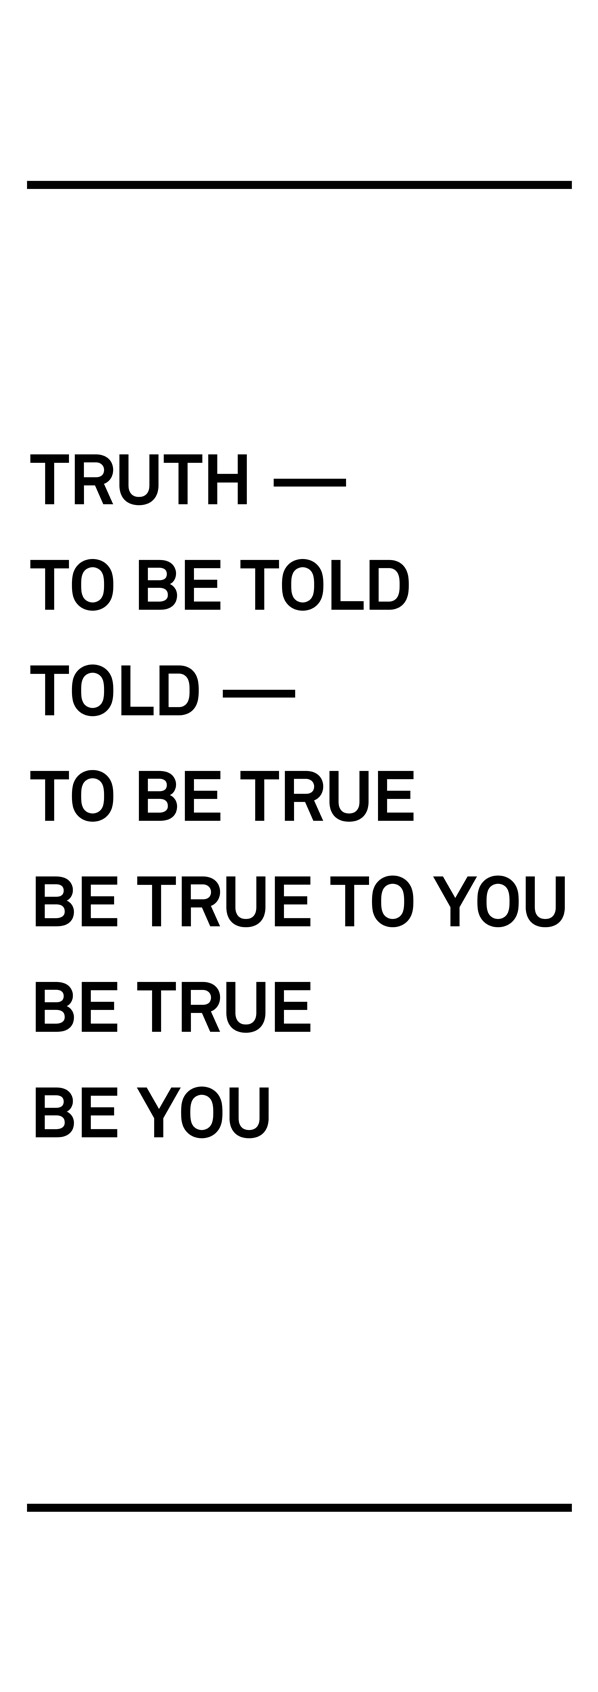 – truth – to be told –